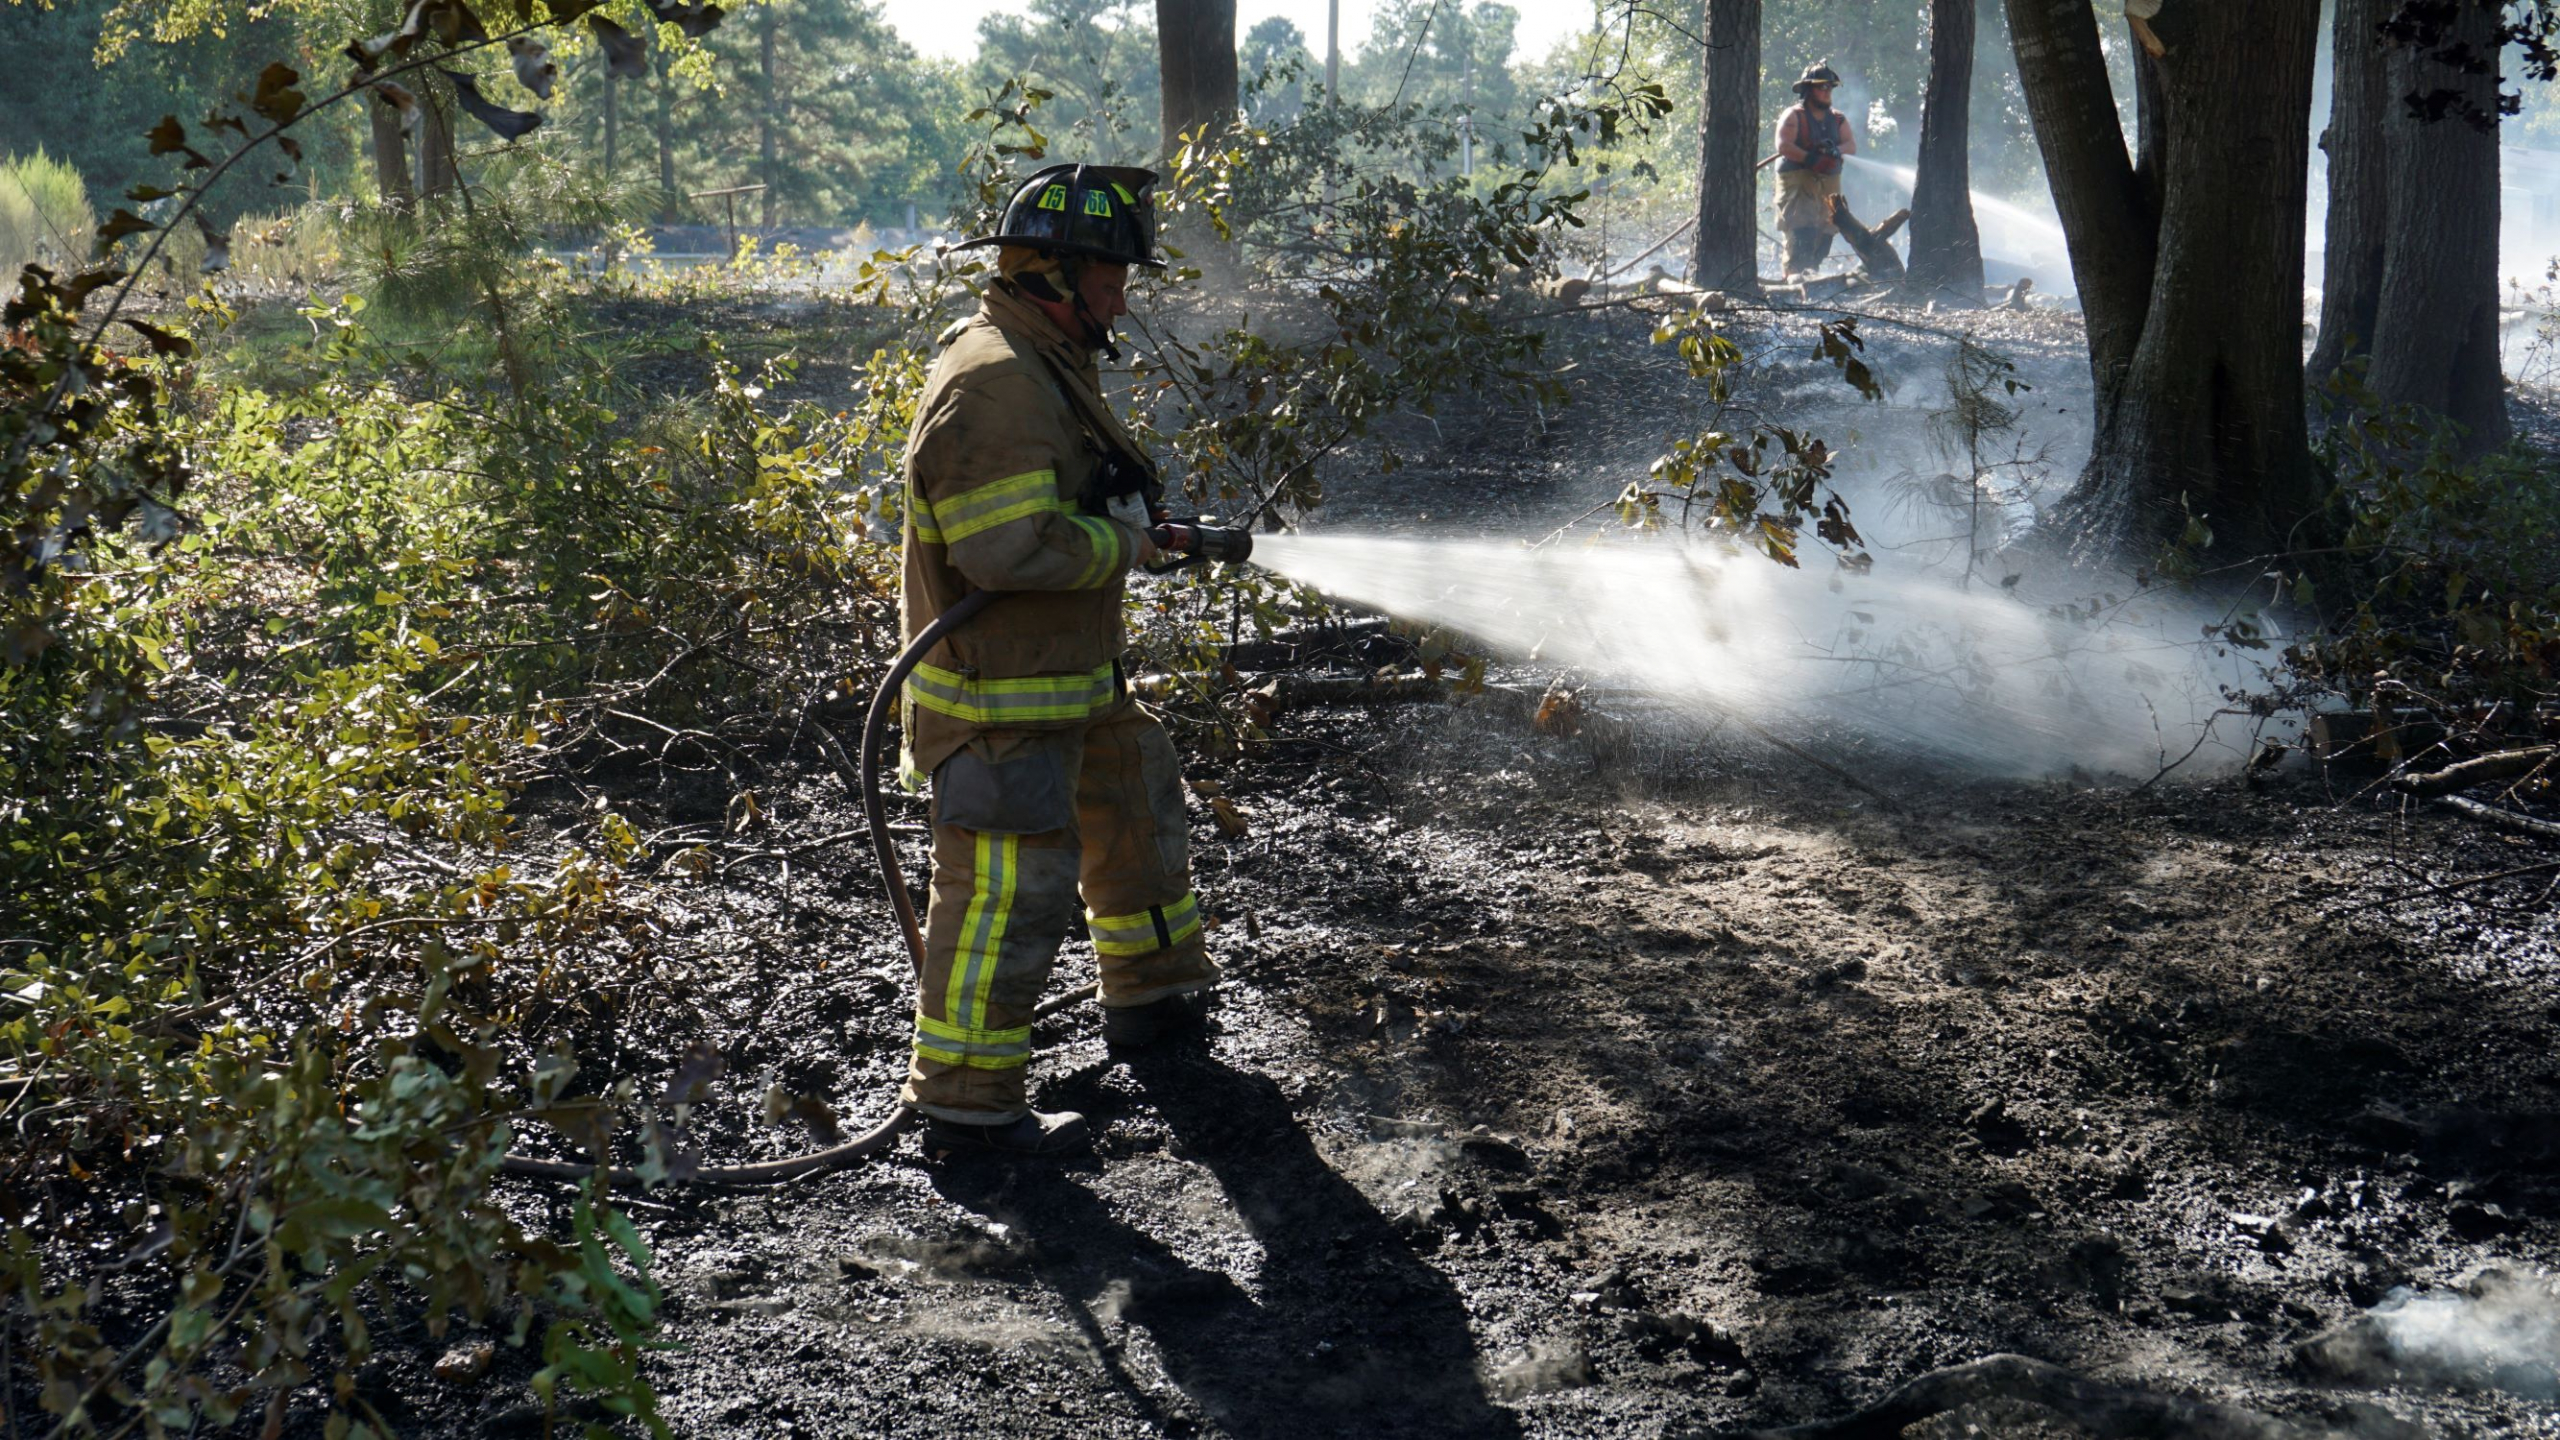 Quick Work Stops Brush Fire (PHOTO GALLERY)